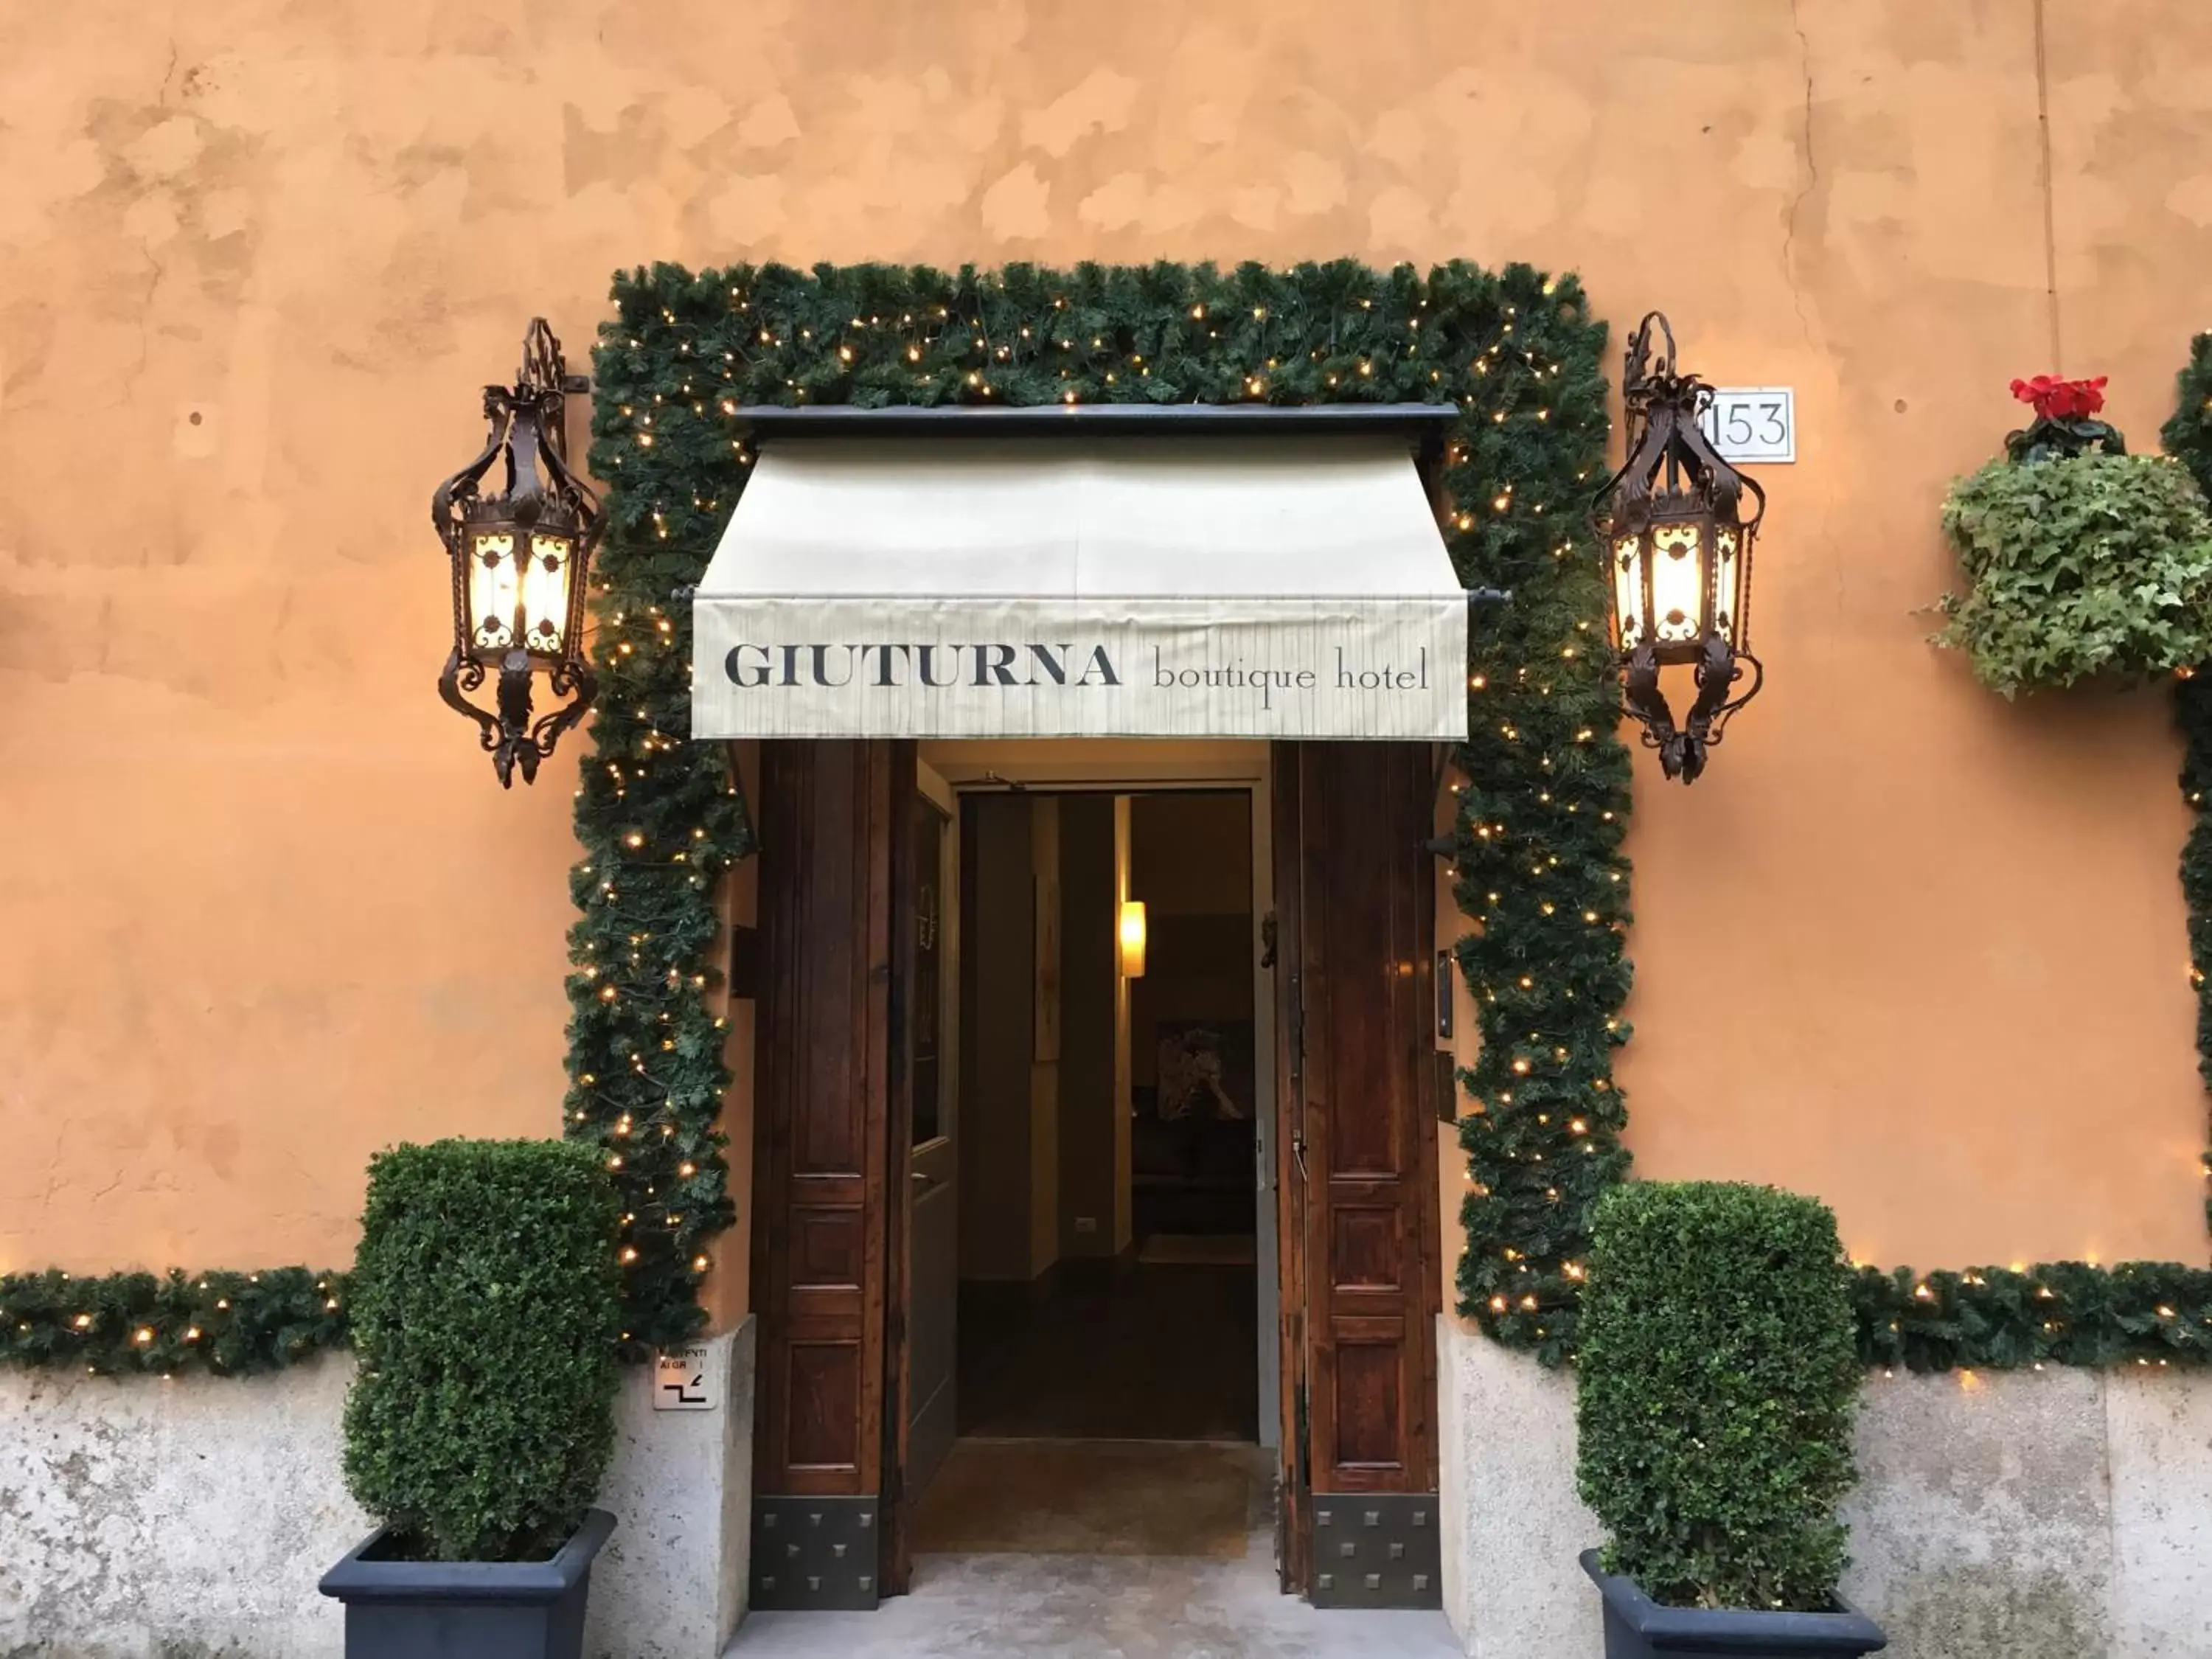 Property building in Giuturna Boutique Hotel